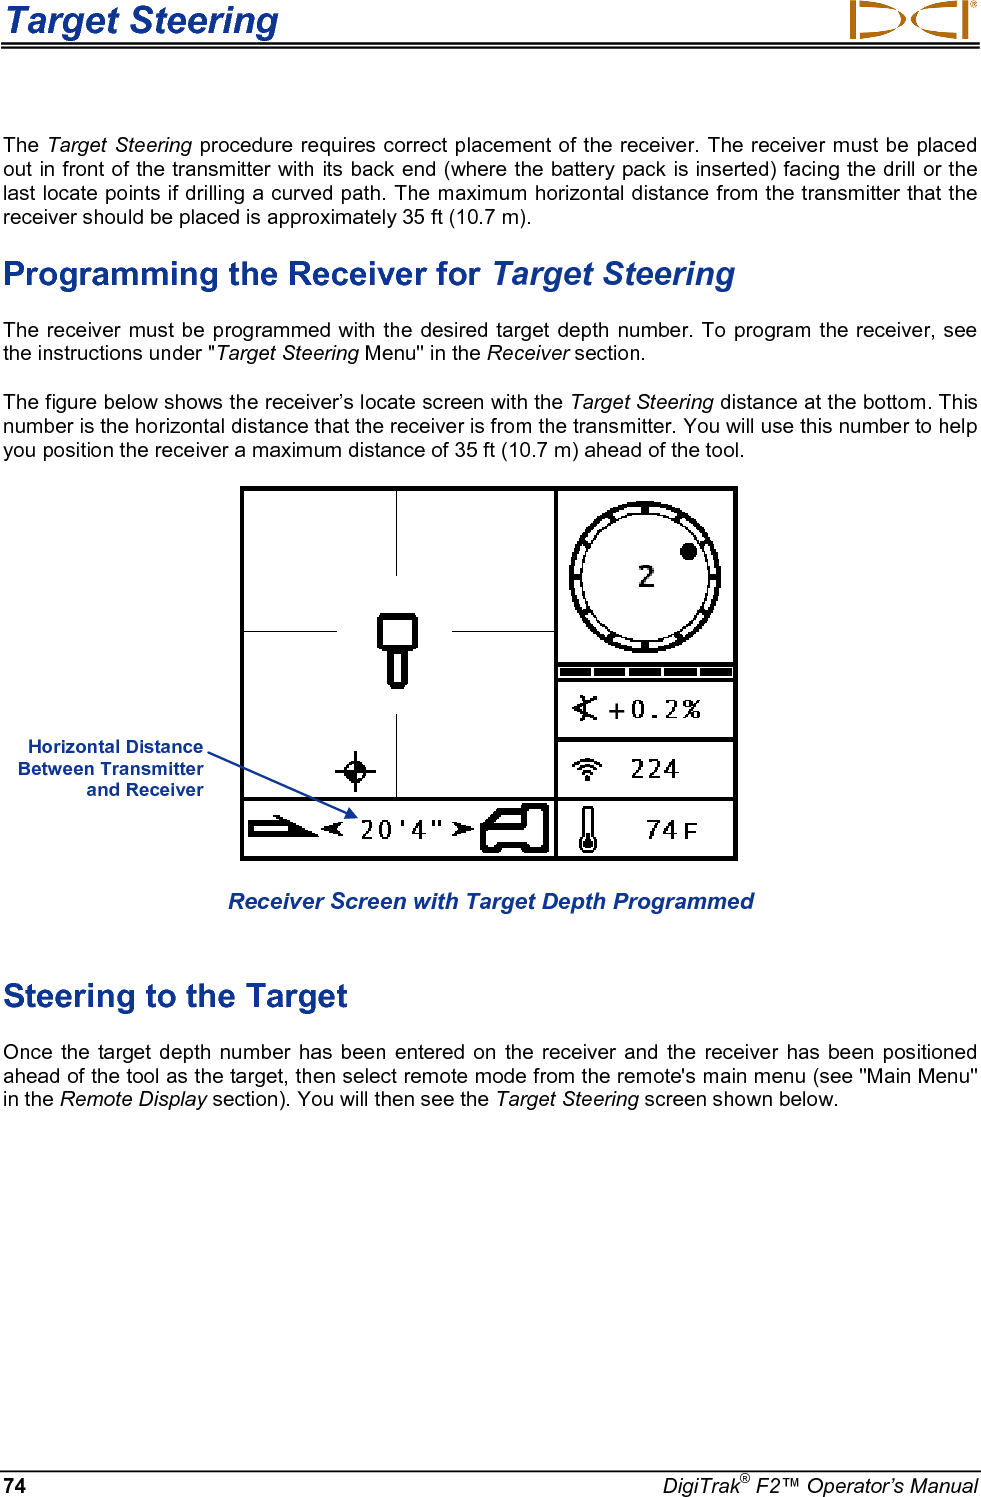 Target Steering     74 DigiTrak® F2™ Operator’s Manual The Target Steering procedure requires correct placement of the receiver. The receiver must be placed out in front of the transmitter with its back end (where the battery pack is inserted) facing the drill or the last locate points if drilling a curved path. The maximum horizontal distance from the transmitter that the receiver should be placed is approximately 35 ft (10.7 m).  Programming the Receiver for Target Steering The receiver must be programmed with the desired target depth number. To program the receiver, see the instructions under &quot;Target Steering Menu&quot; in the Receiver section. The figure below shows the receiver’s locate screen with the Target Steering distance at the bottom. This number is the horizontal distance that the receiver is from the transmitter. You will use this number to help you position the receiver a maximum distance of 35 ft (10.7 m) ahead of the tool.    Receiver Screen with Target Depth Programmed  Steering to the Target Once the target depth number has been entered on the receiver and the receiver has been positioned ahead of the tool as the target, then select remote mode from the remote&apos;s main menu (see &quot;Main Menu&quot; in the Remote Display section). You will then see the Target Steering screen shown below.   Horizontal Distance Between Transmitter and Receiver  + 